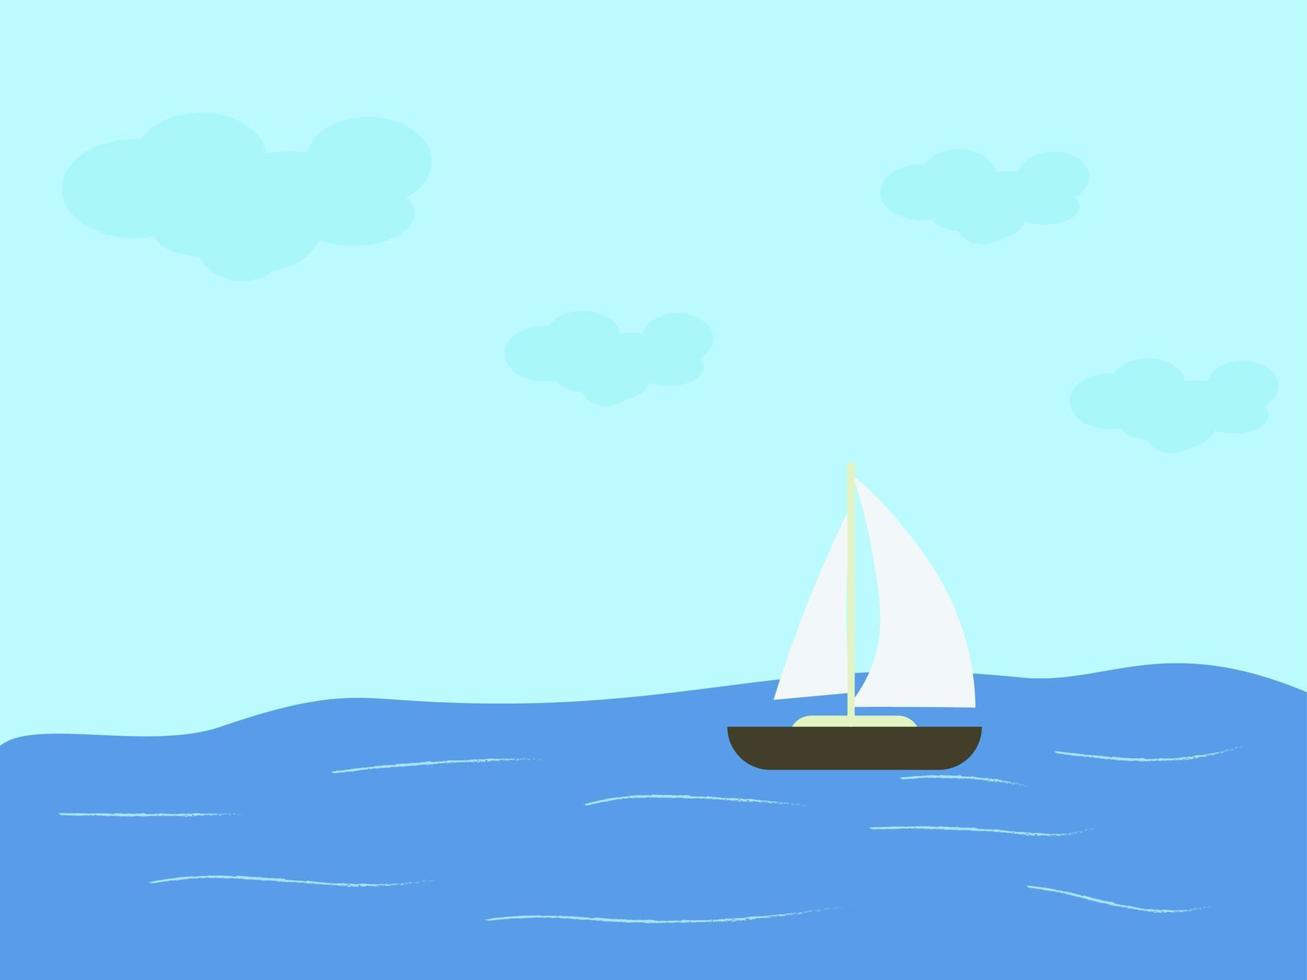 Boat on water, illustration, vector on white background.